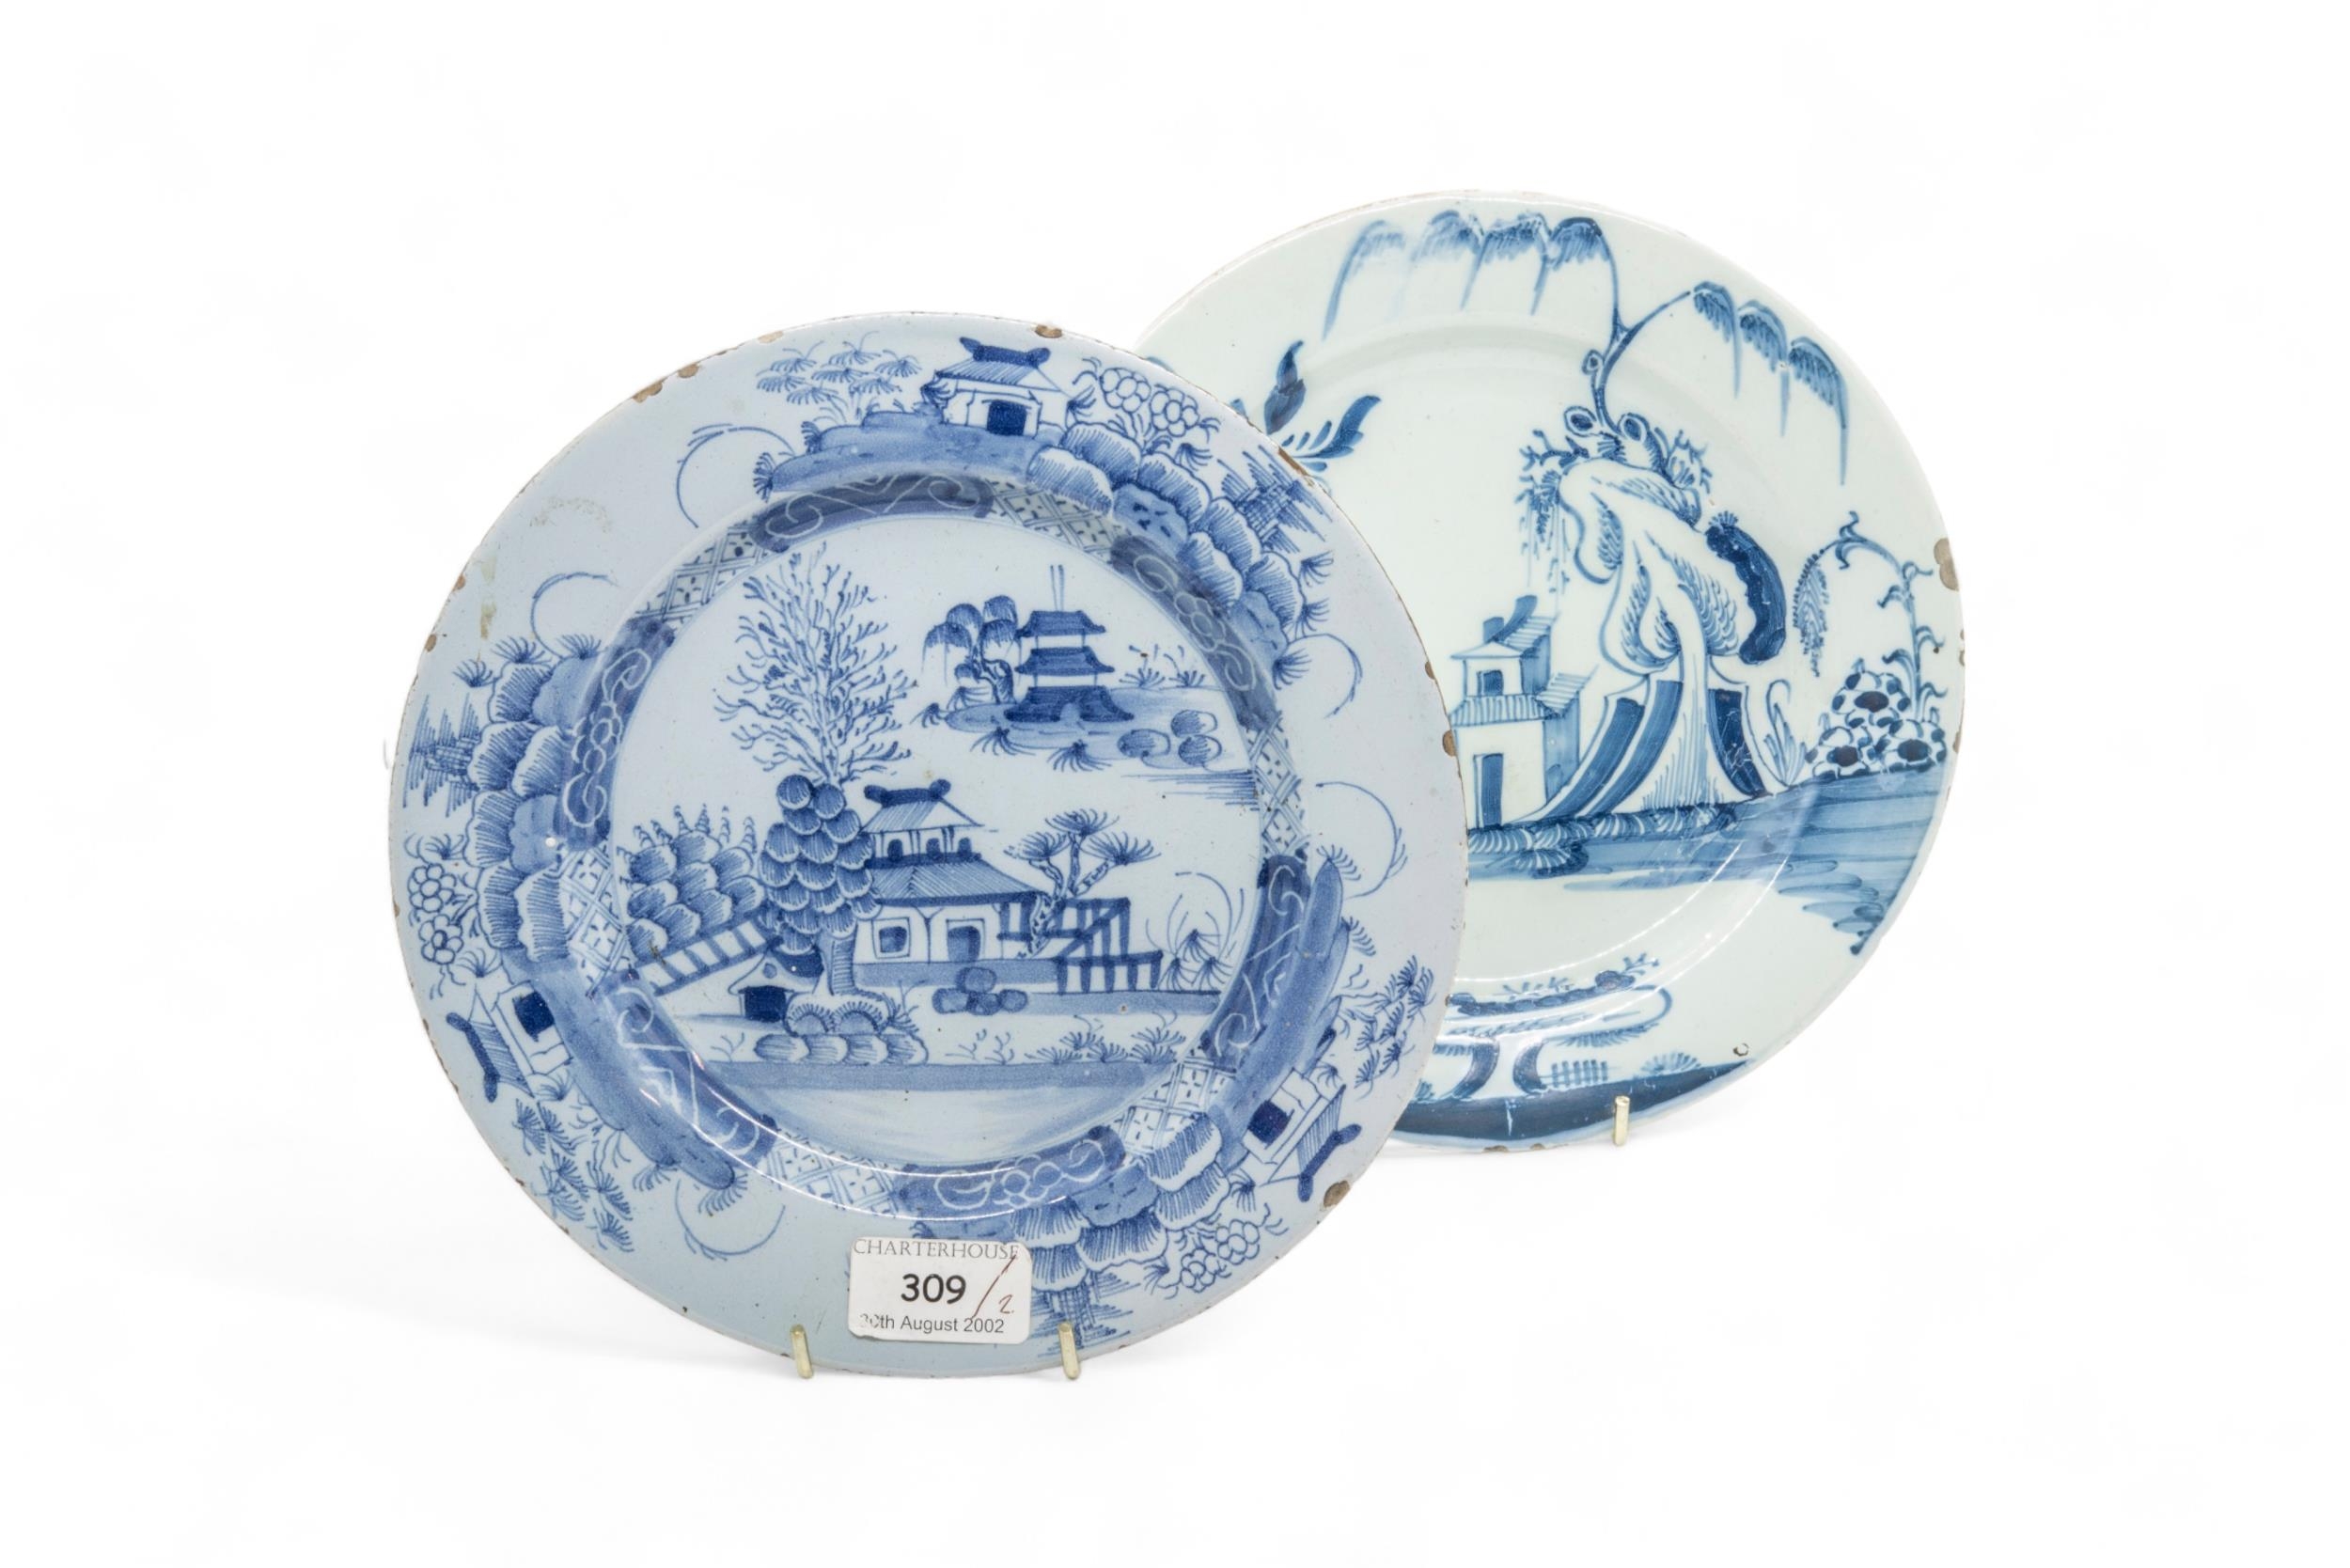 A LATE 17TH / 18TH CENTURY LOBED FAIENCE DISH Together with seven 18th century delft plates, 25cms - Image 3 of 6